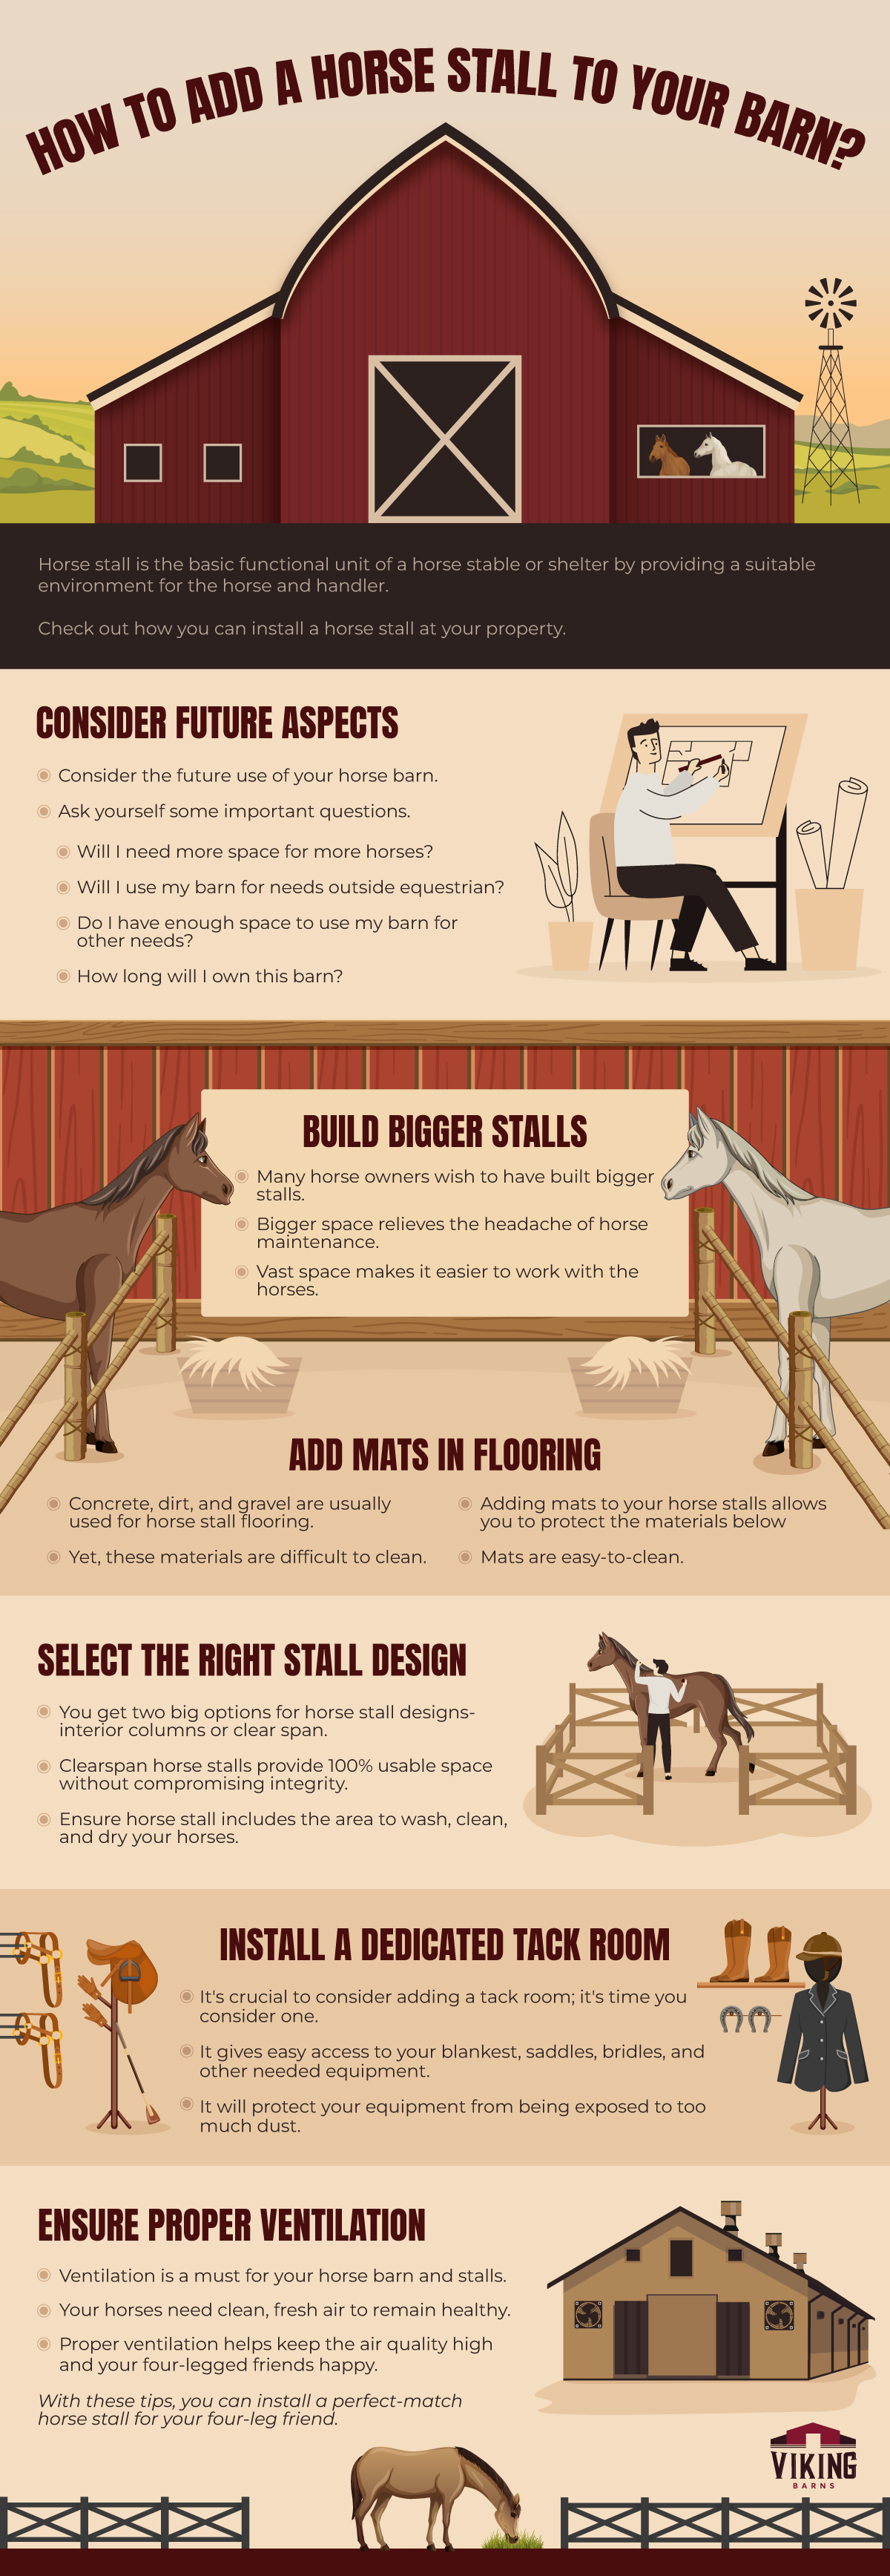 How To Add A Horse Stall to Your Barn